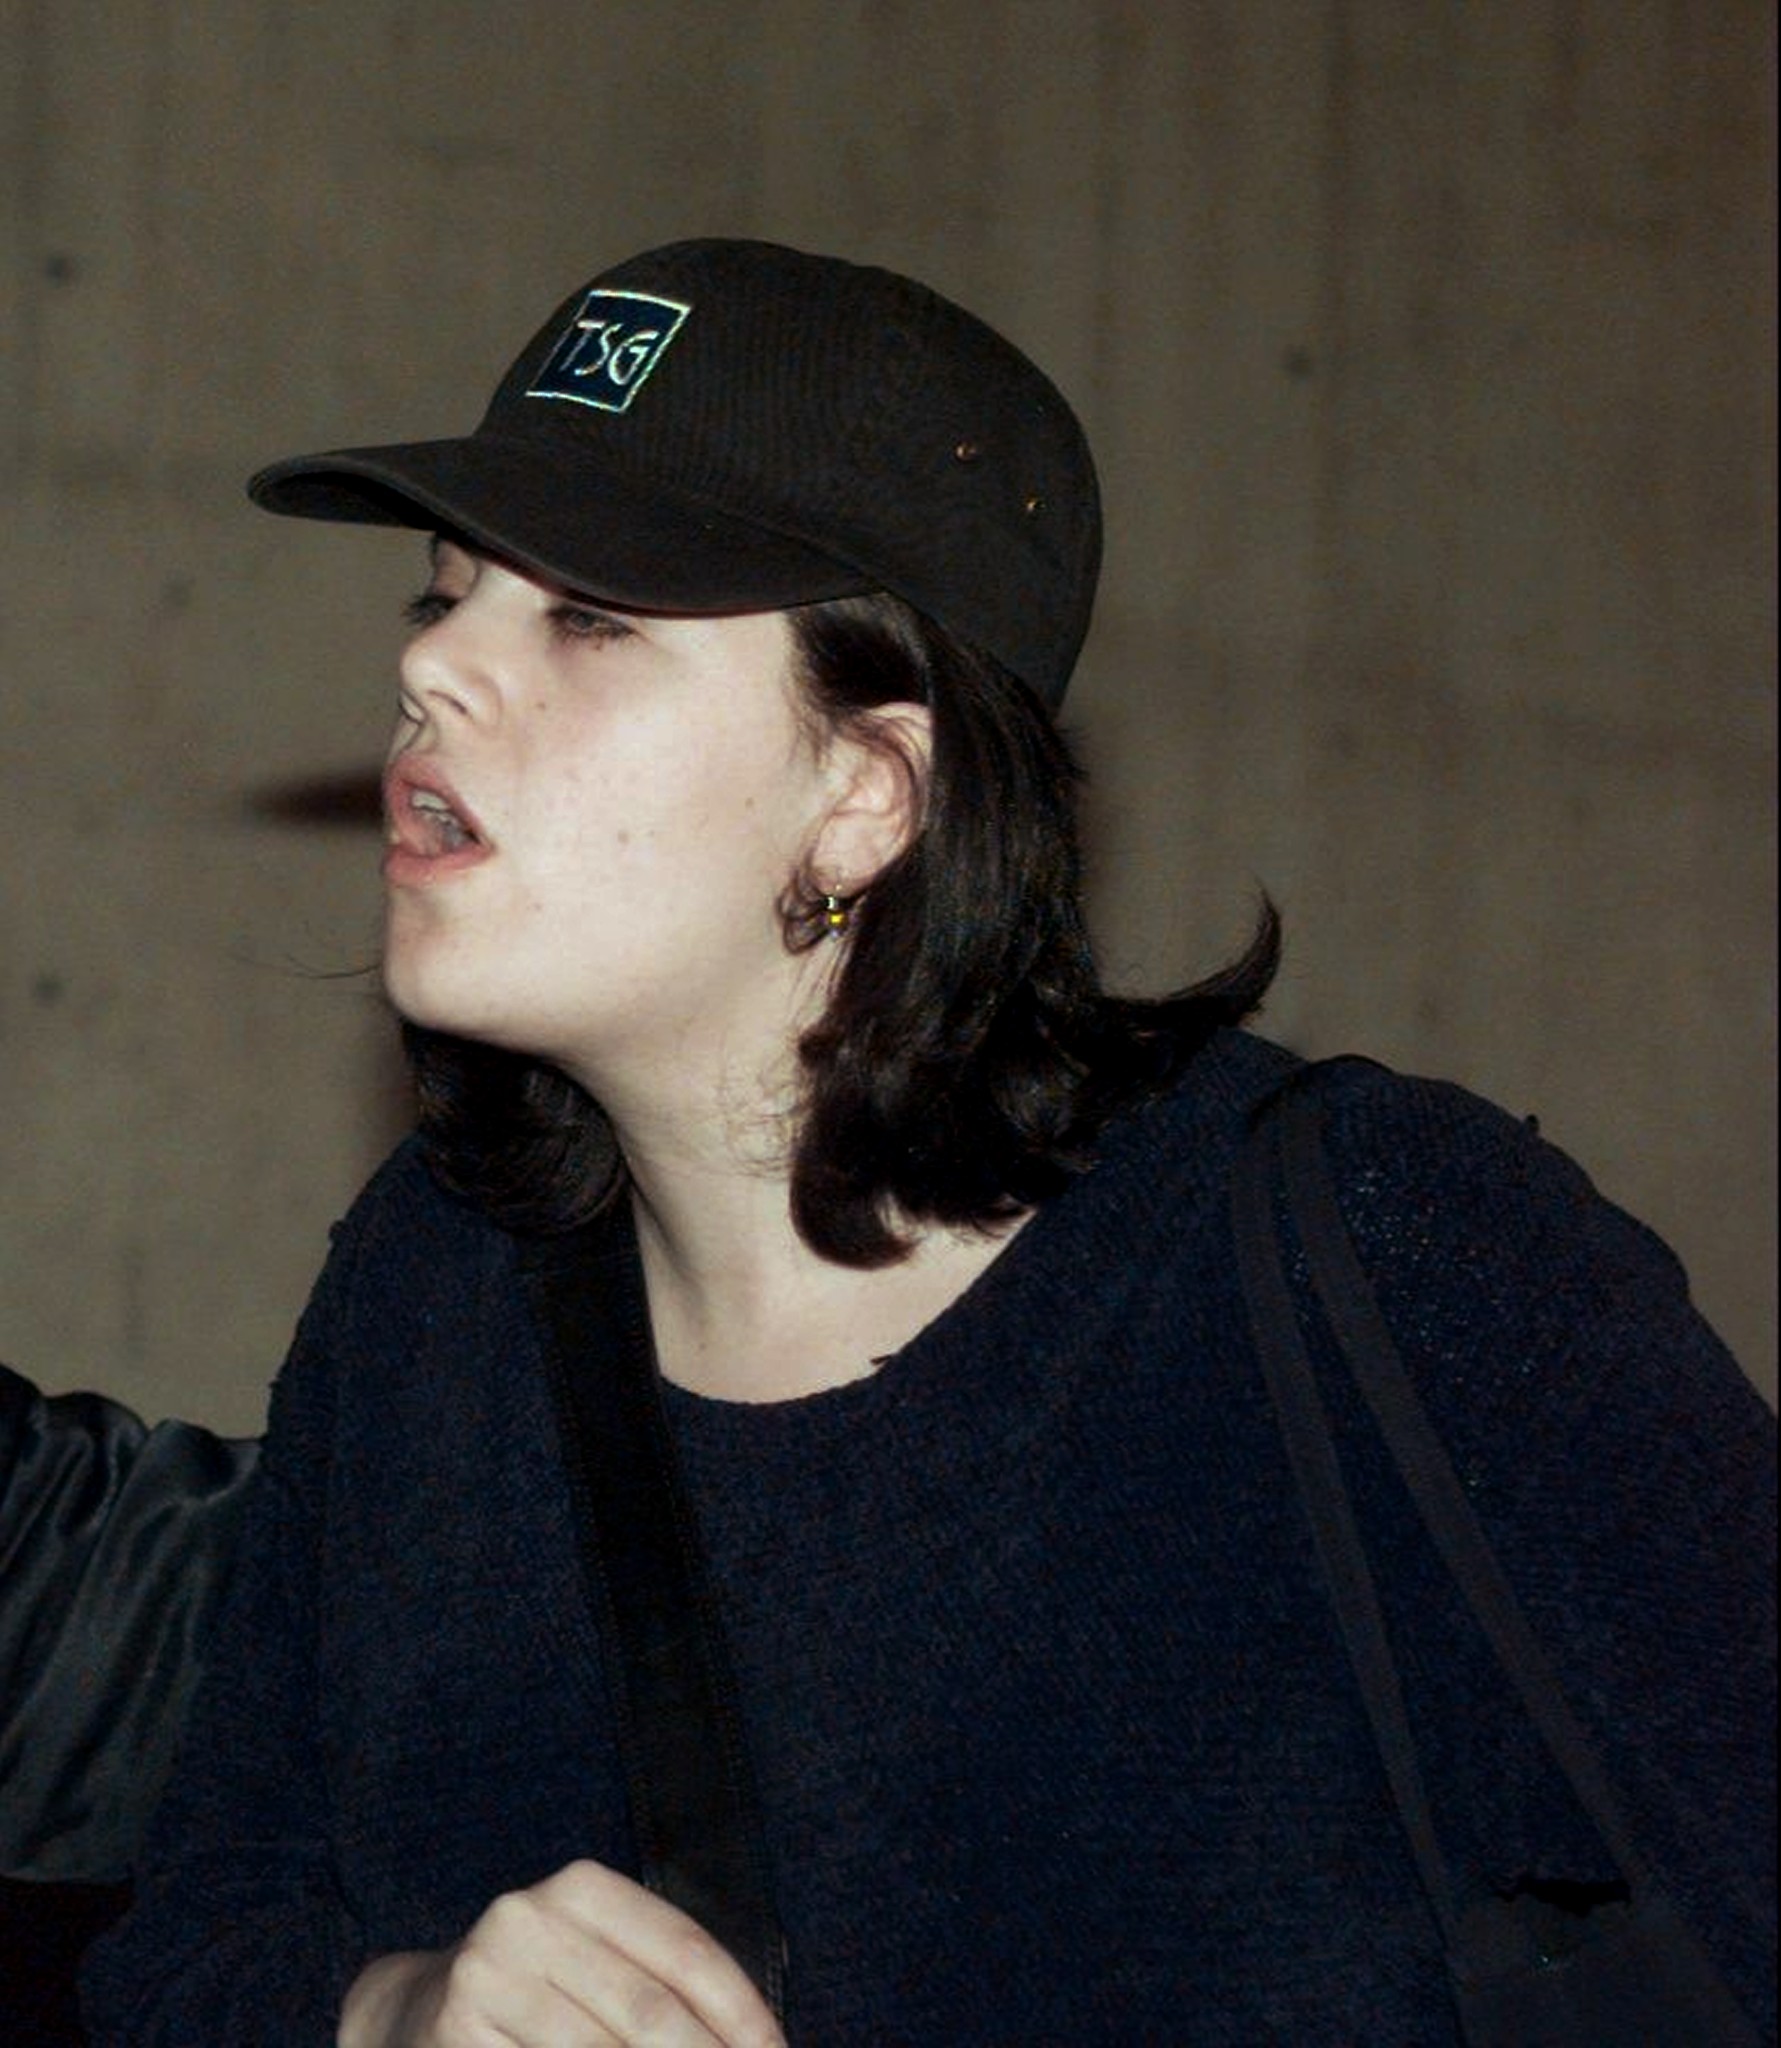 Monica Lewinsky photographed at Kennedy Airport on March 4, 1999 | Source: Getty Images